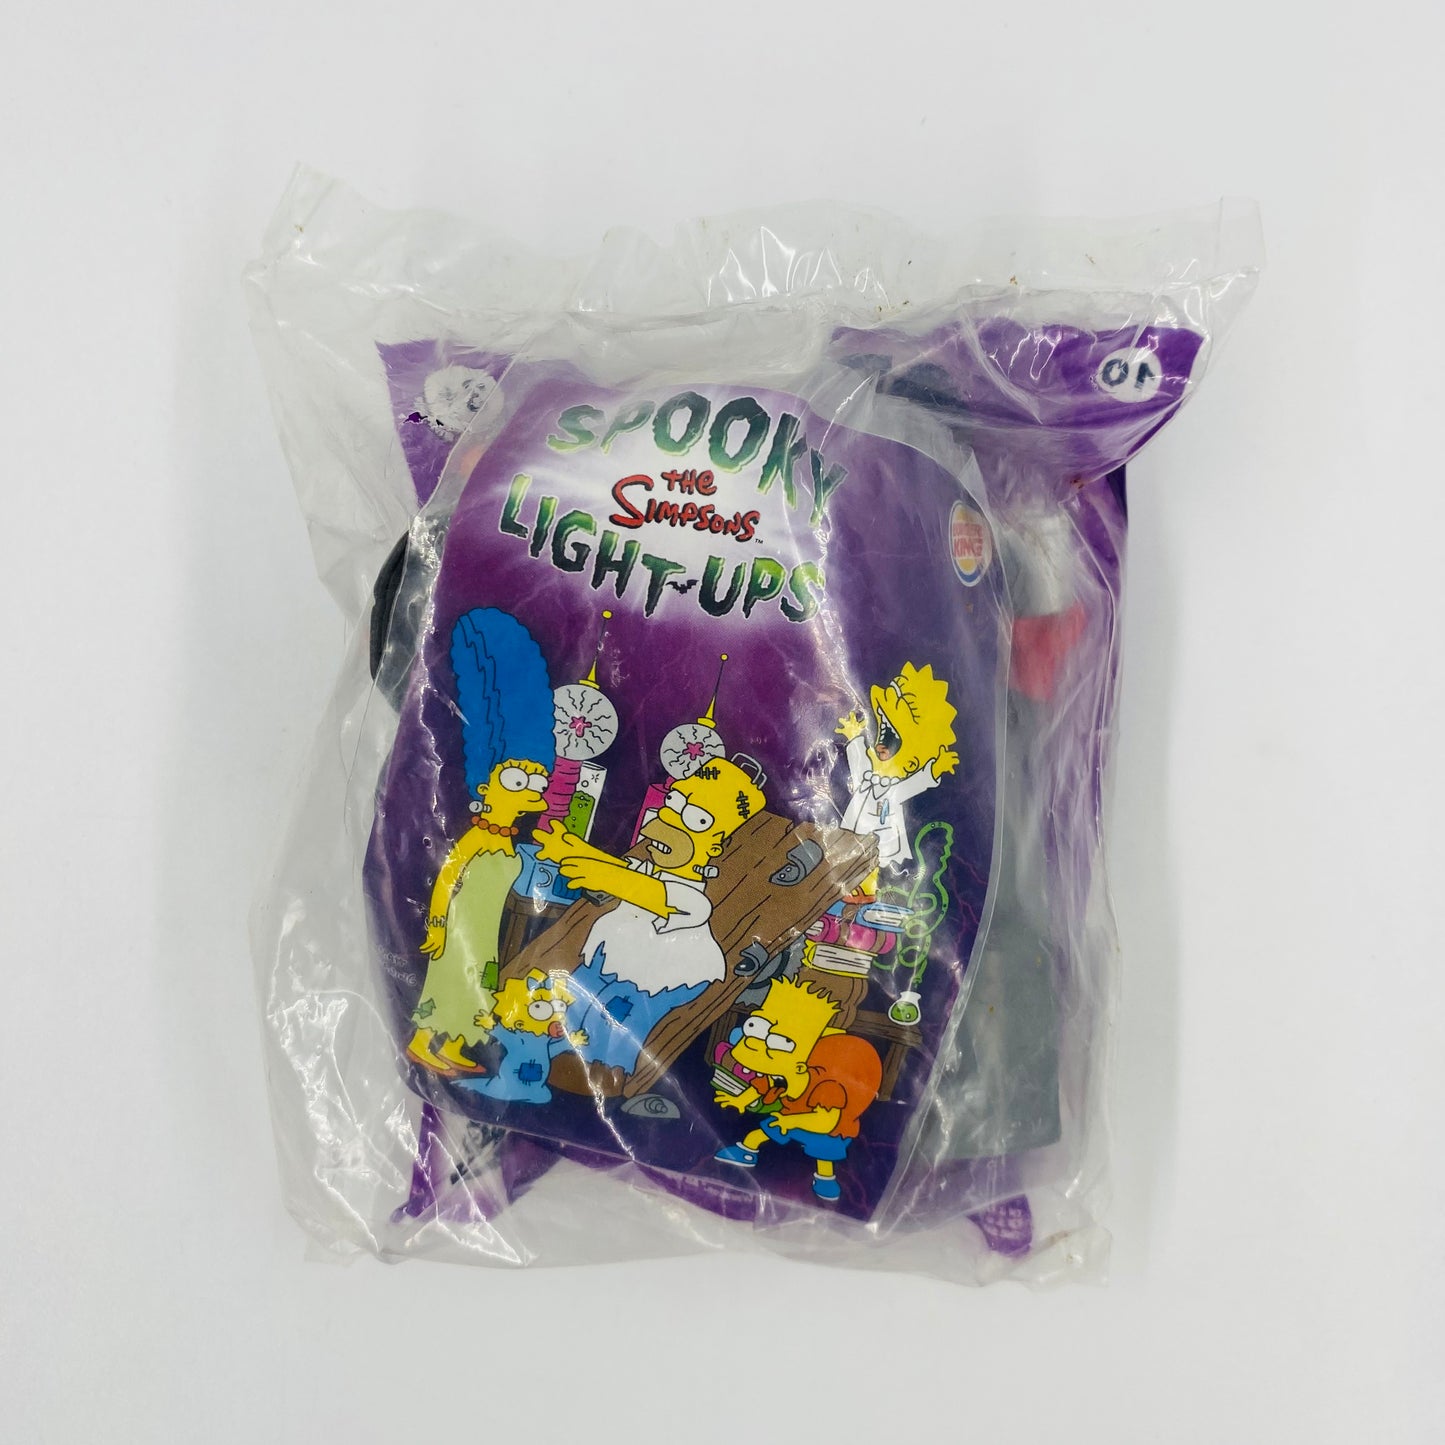 The Simpsons Spooky Light-Ups Marge Simpson Burger King Kids' Meals toy (2001) bagged